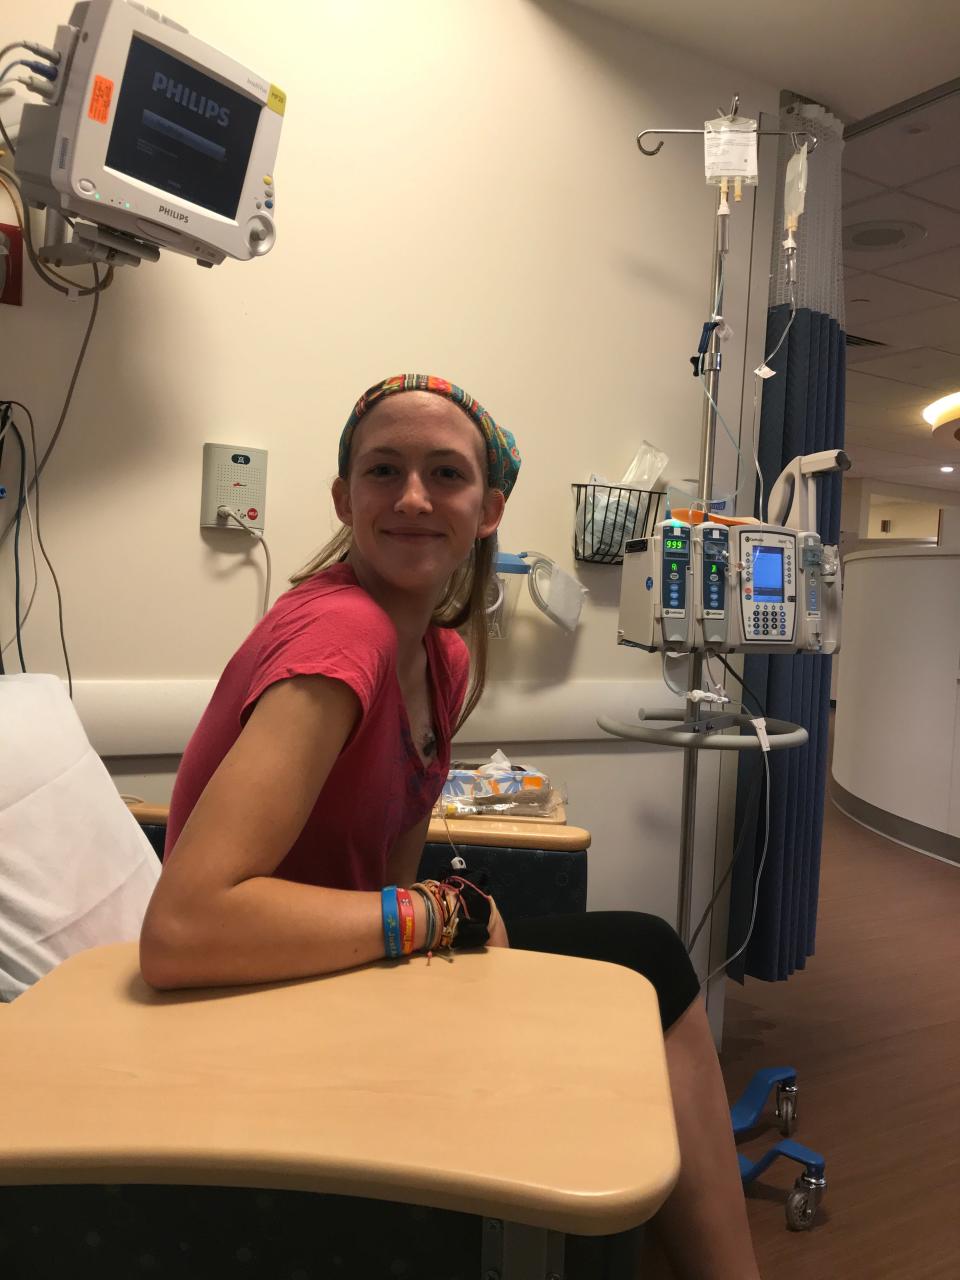 Throughout her treatment for metastatic alveolar rhabdomyosarcoma, Kyla McGarry of Berkley never complained and had a smile for everyone, her mother Kristina McGarry said. Kyla died at 16 in March 2020.